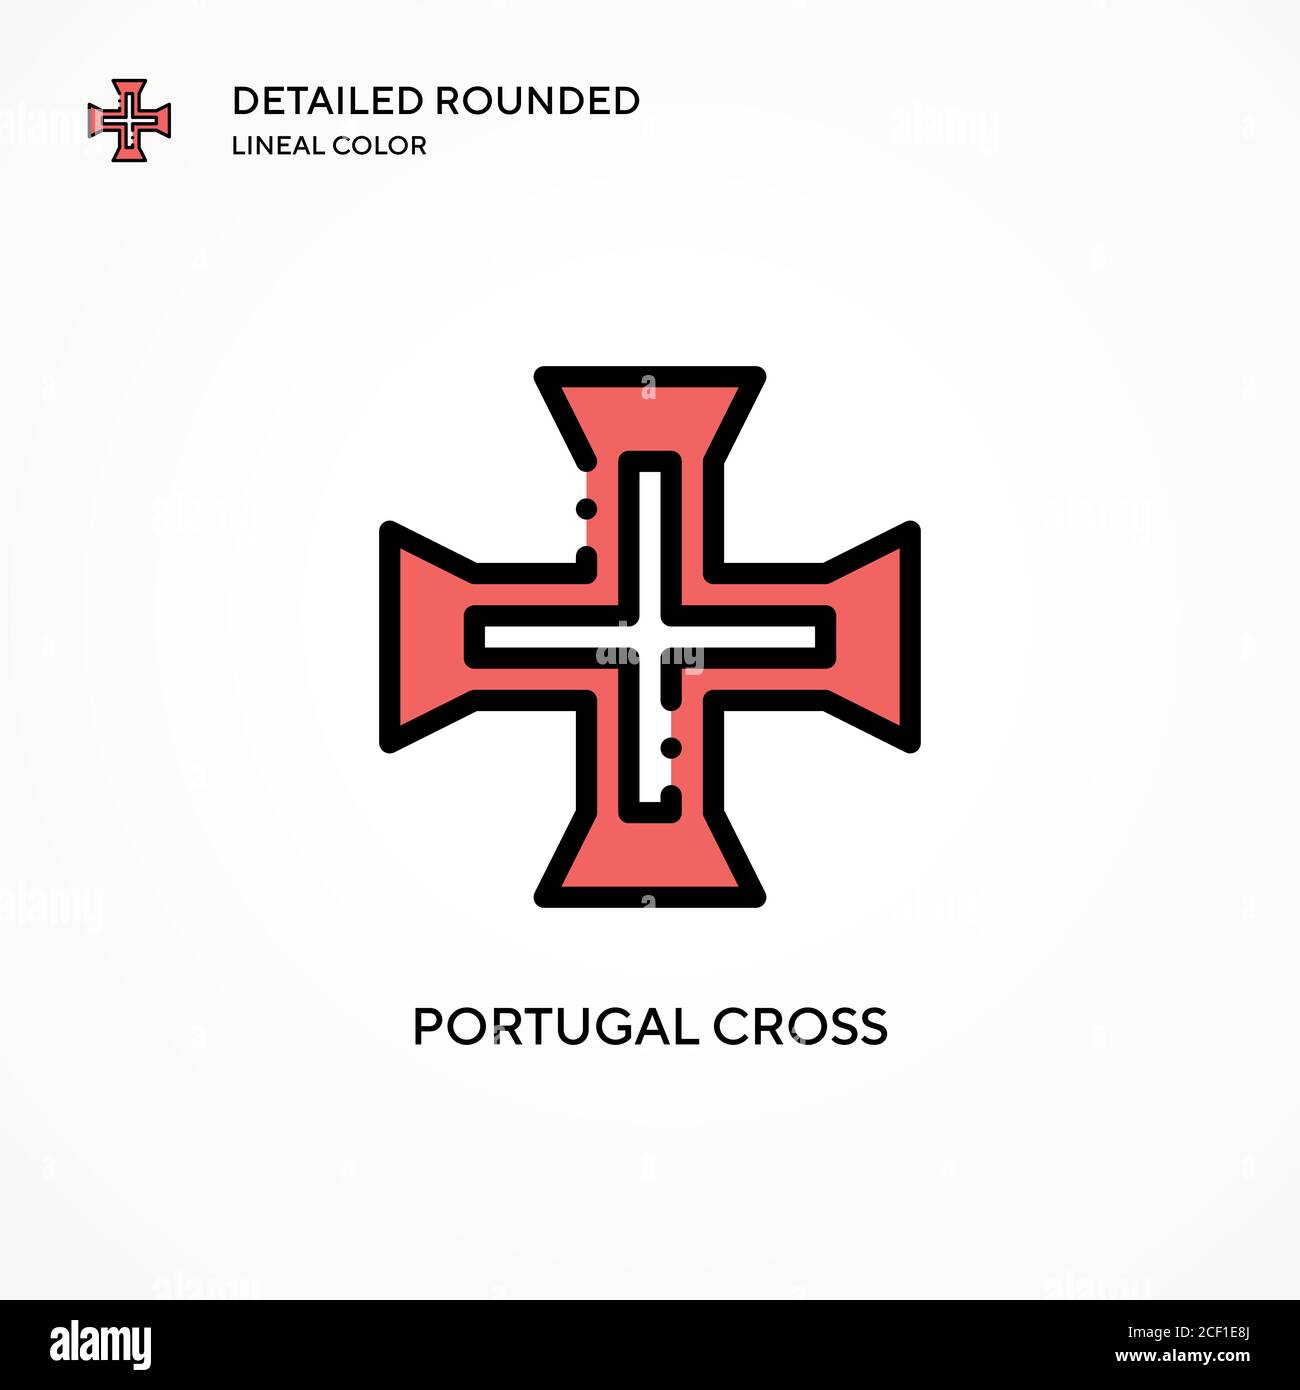 Portugal cross vector icon. Modern vector illustration concepts. Easy to edit and customize. Stock Vector